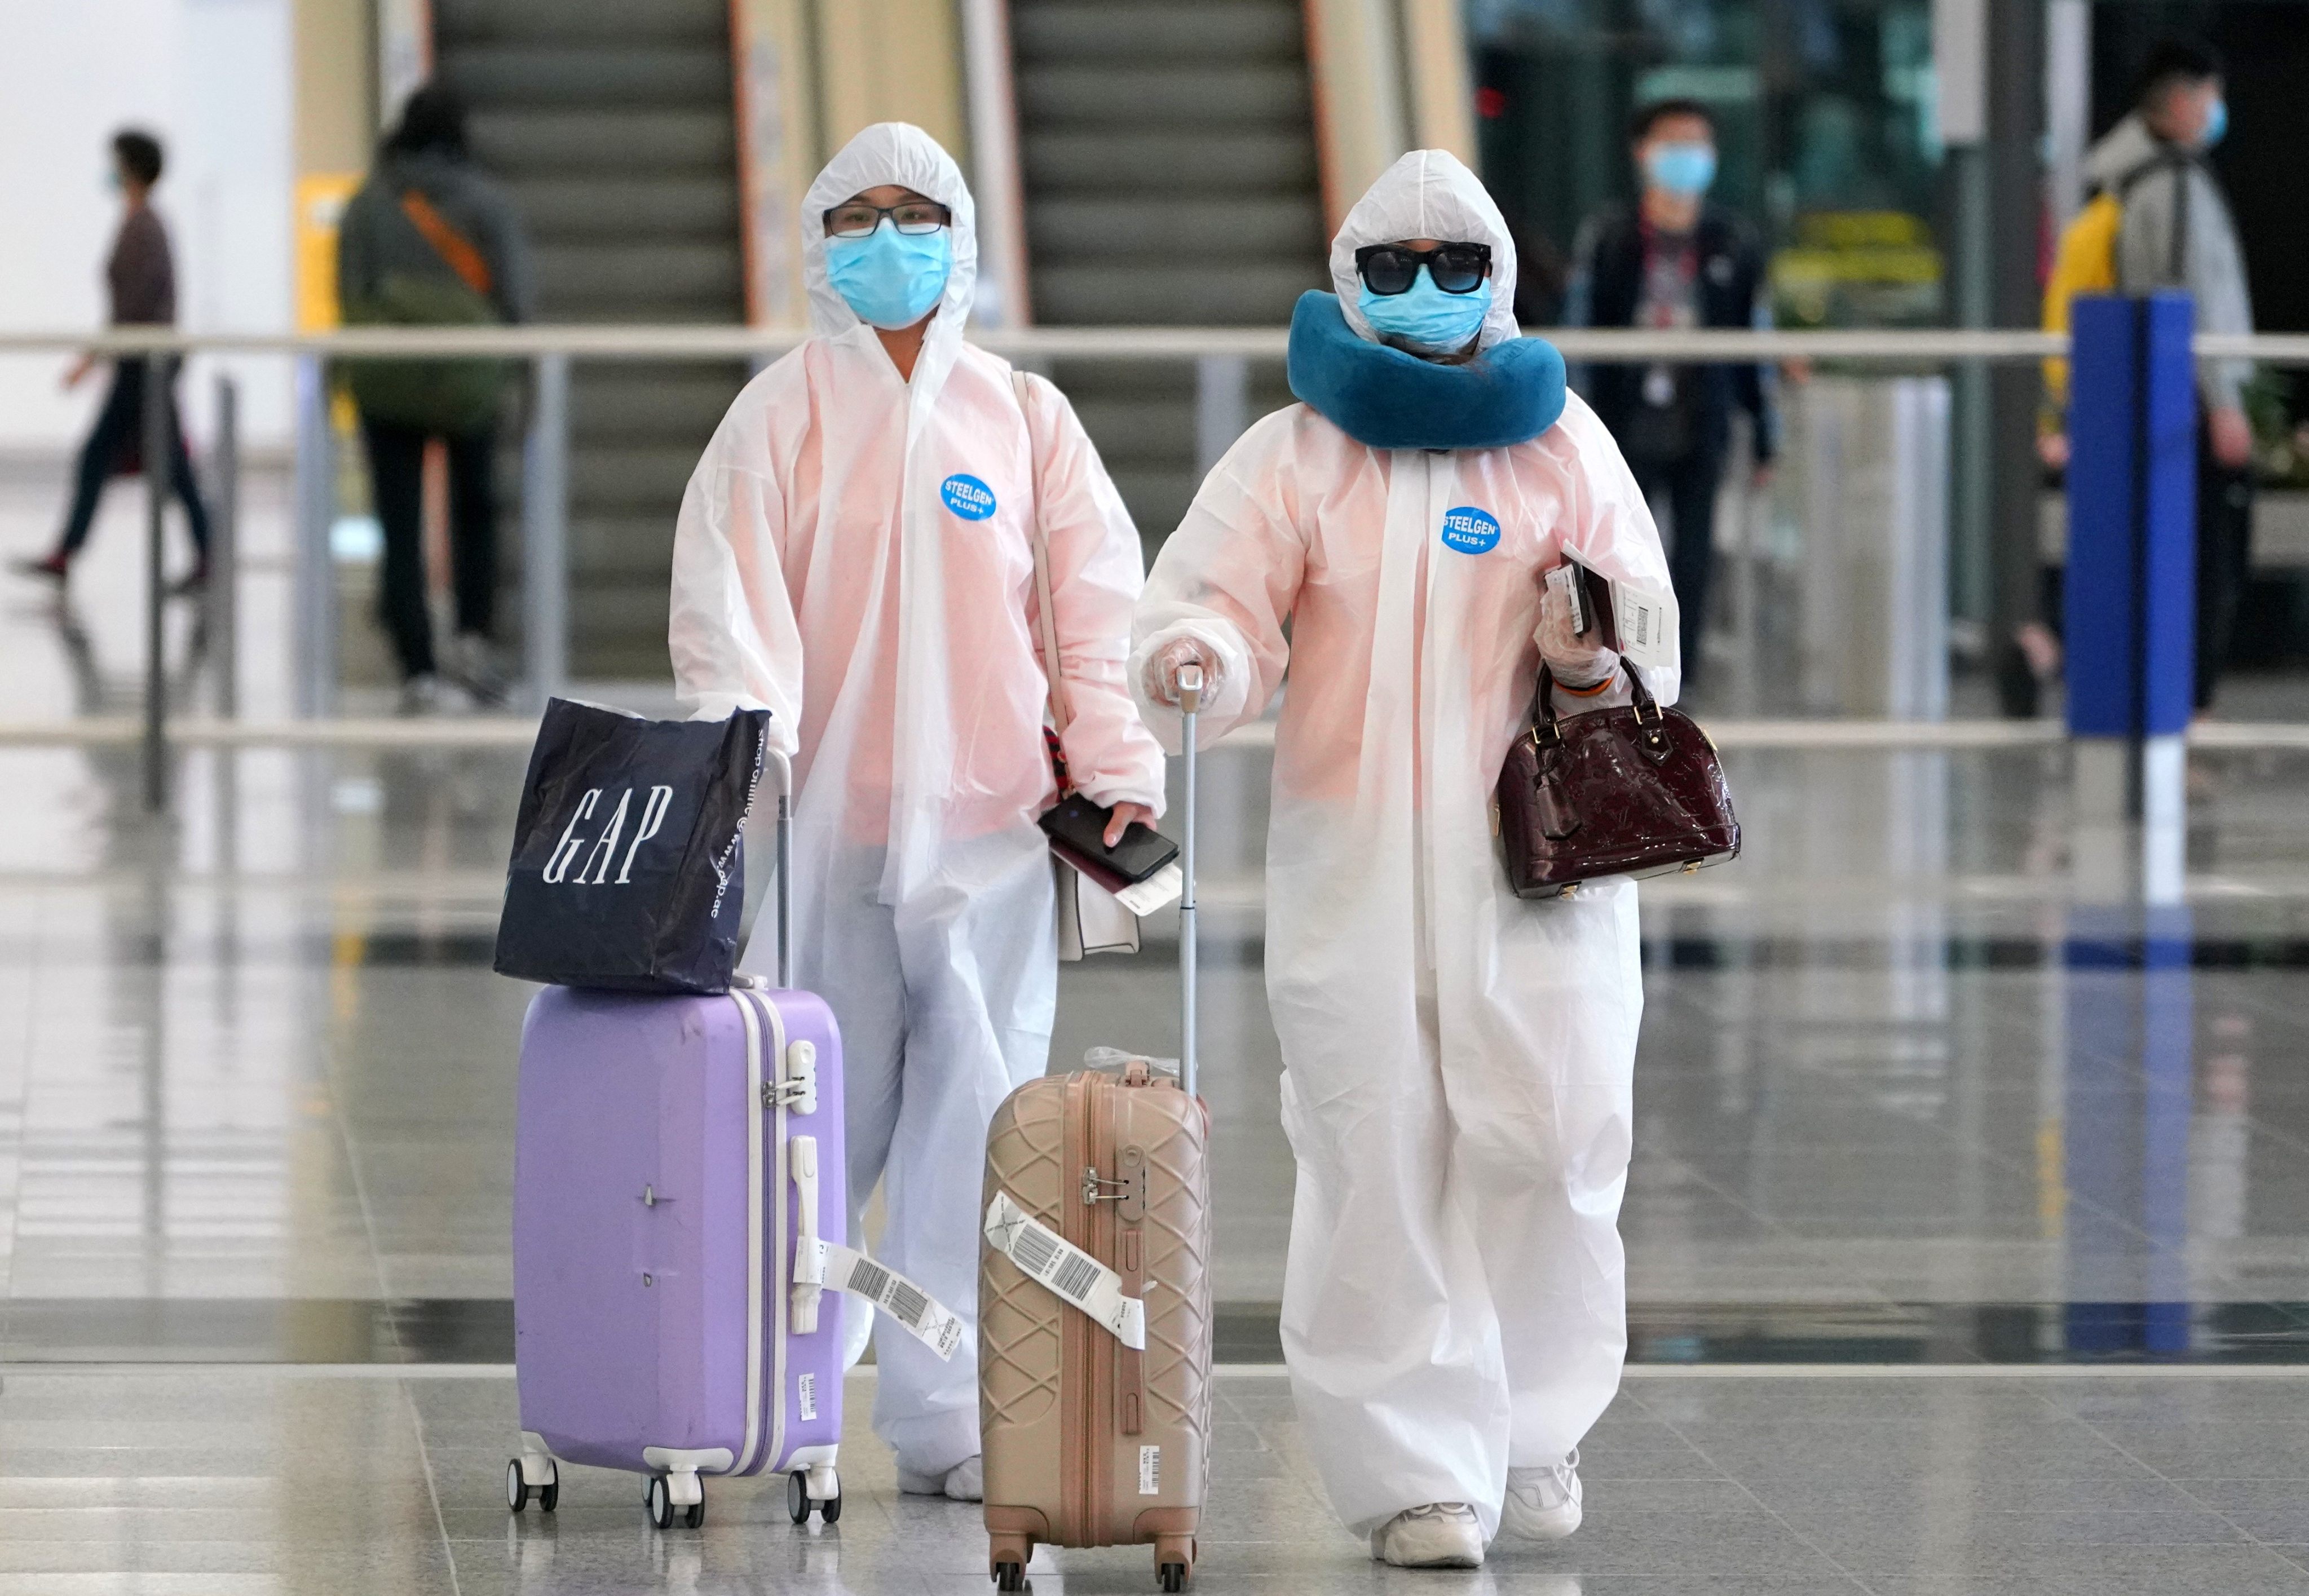 Passengers arriving at Hong Kong International Airport during the Covid-19 pandemic. Travel restrictions, testing and quarantine requirements stopped many people visiting Hong Kong for nearly three years, and affected tourism and the restaurant trade. Photo: Getty Images